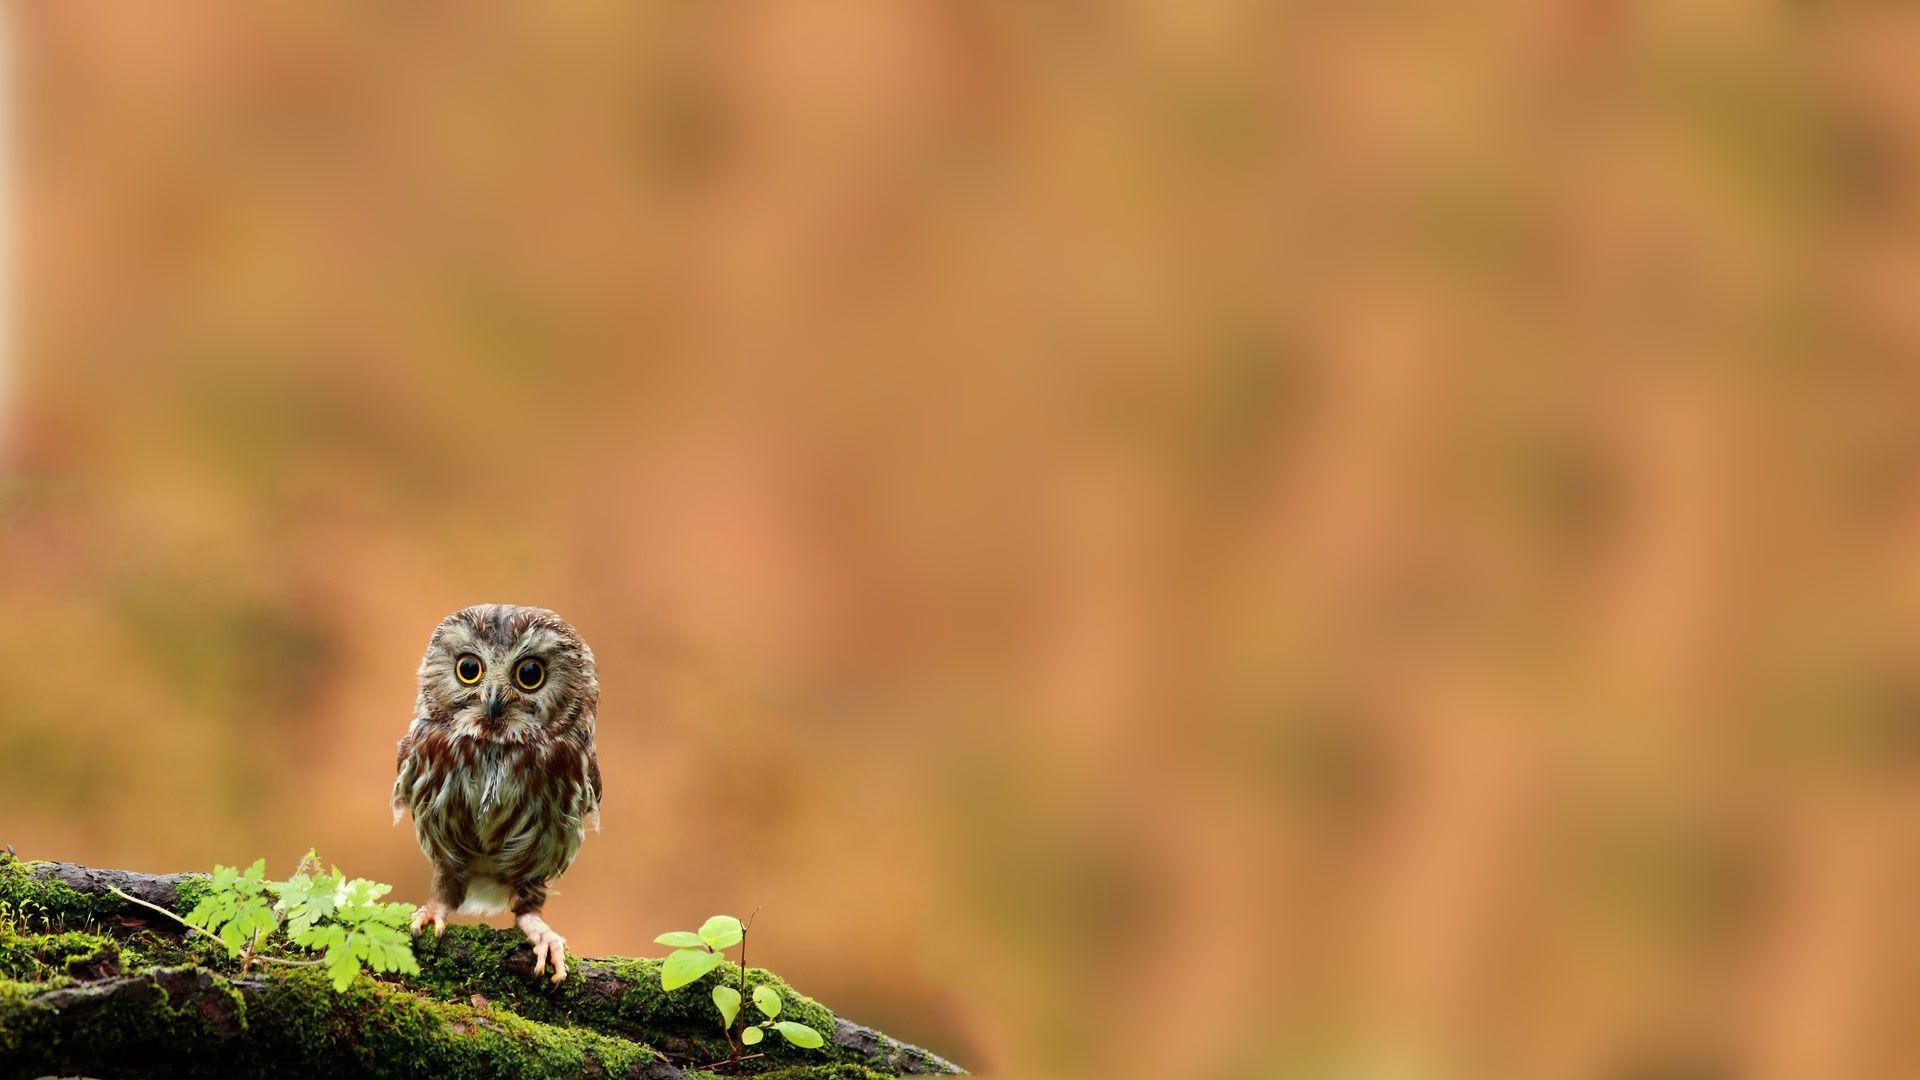 1920x1080 9. cute-owl-wallpapers9-600x338